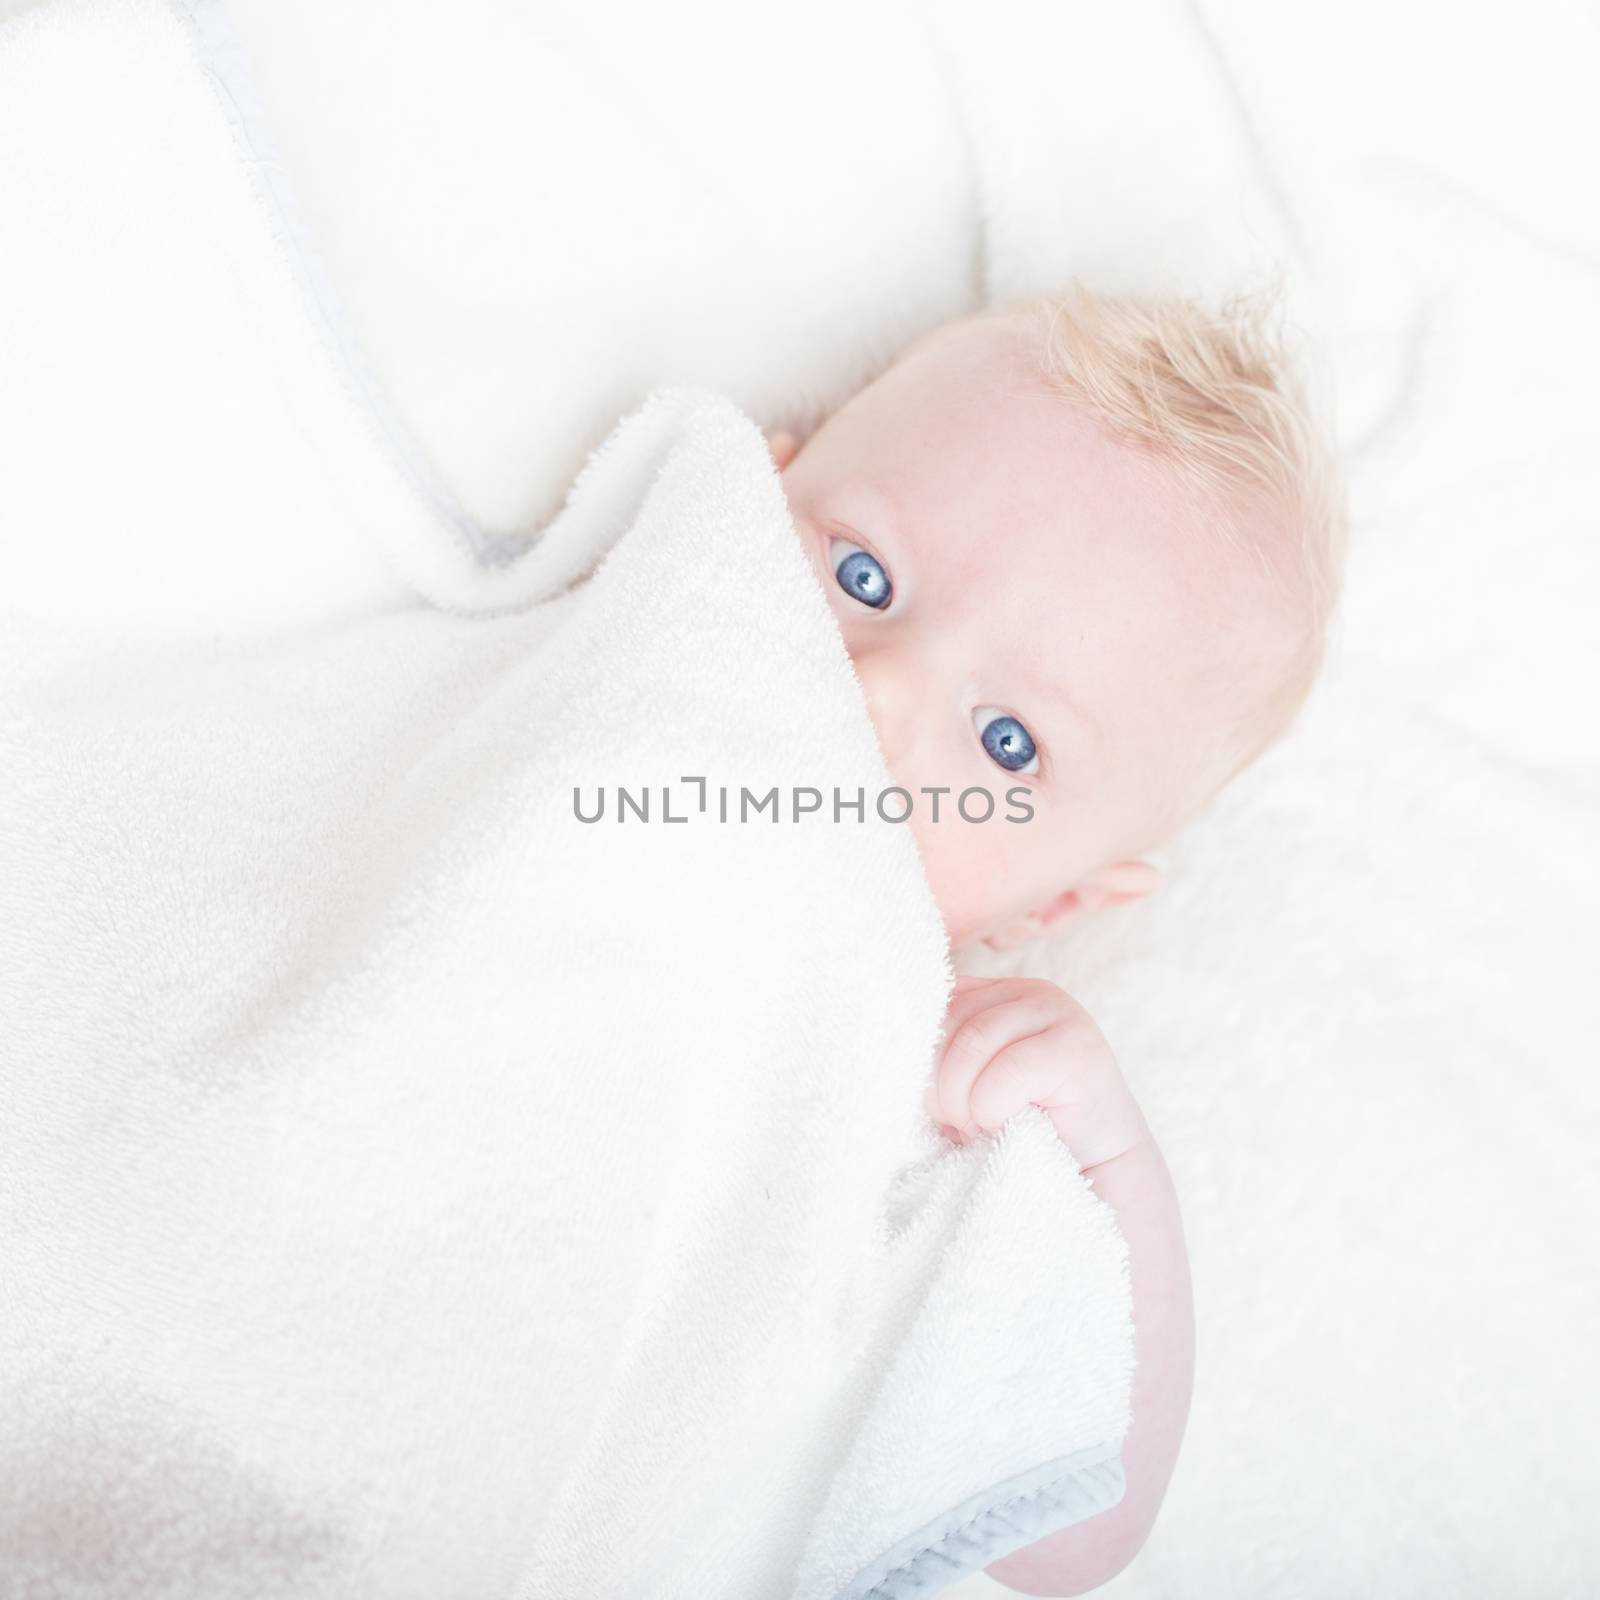 Baby with blue eyes by kasto